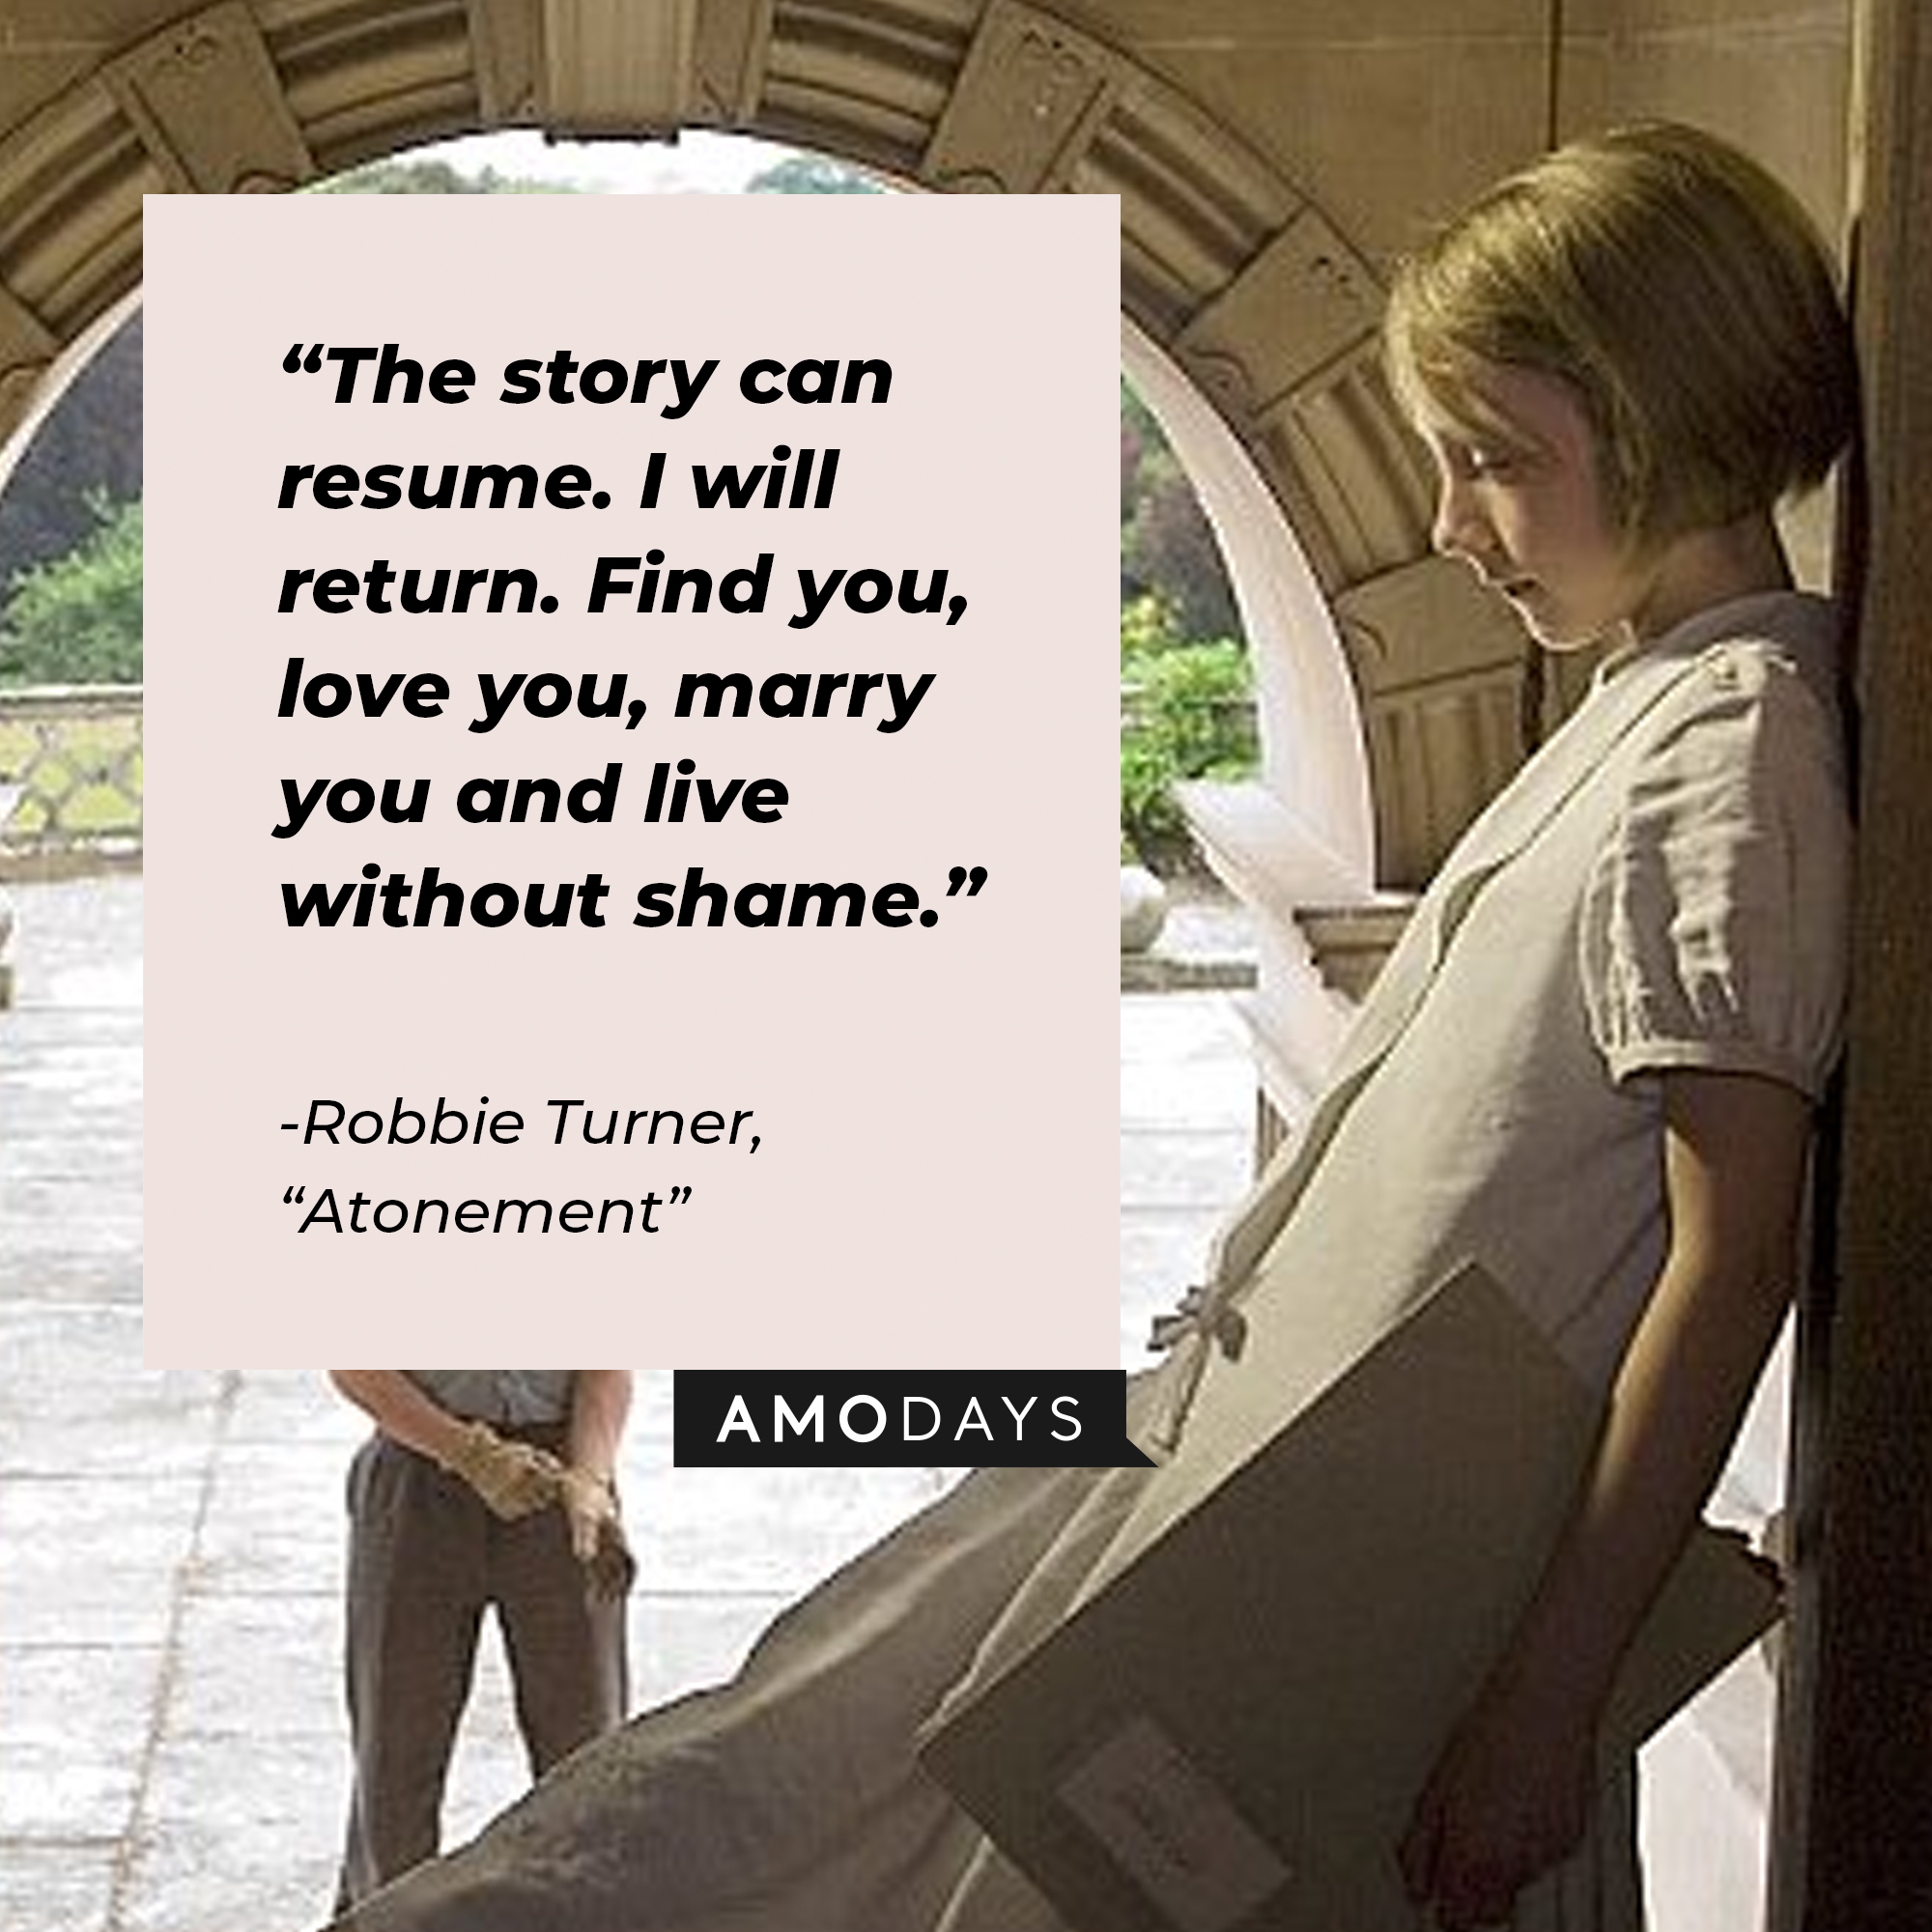 A photo of young Briony with the quote, "The story can resume. I will return. Find you, love you, marry you and live without shame." | Source: Facebook/AtonementMovie